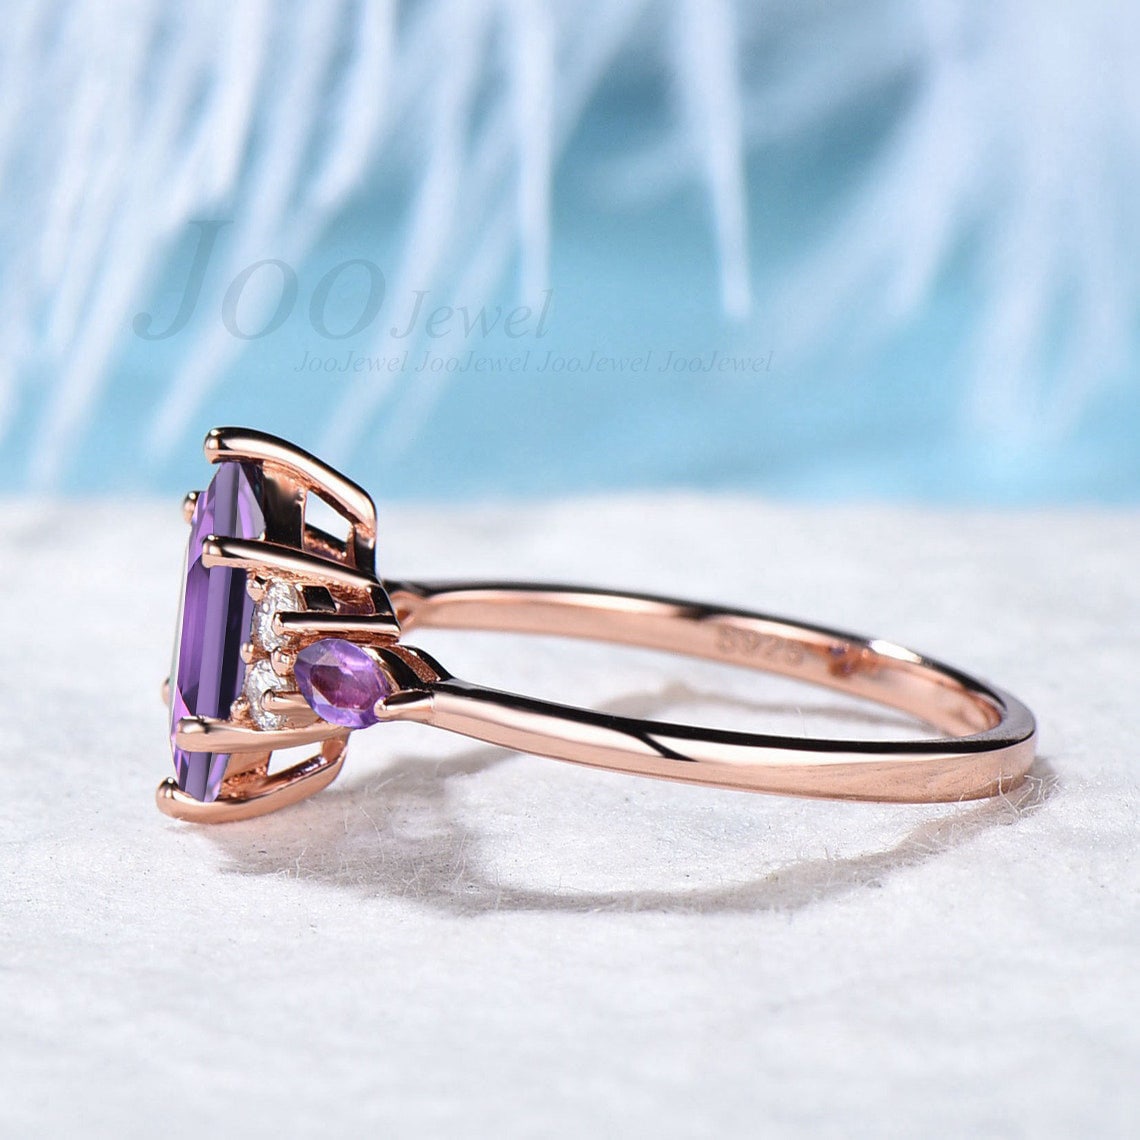 Hexagon Cut Natural Purple Amethyst Ring Unique Amethyst Engagement Ring Sterling Silver Crystal Bridal Wedding Ring Anniversary Gifts Women